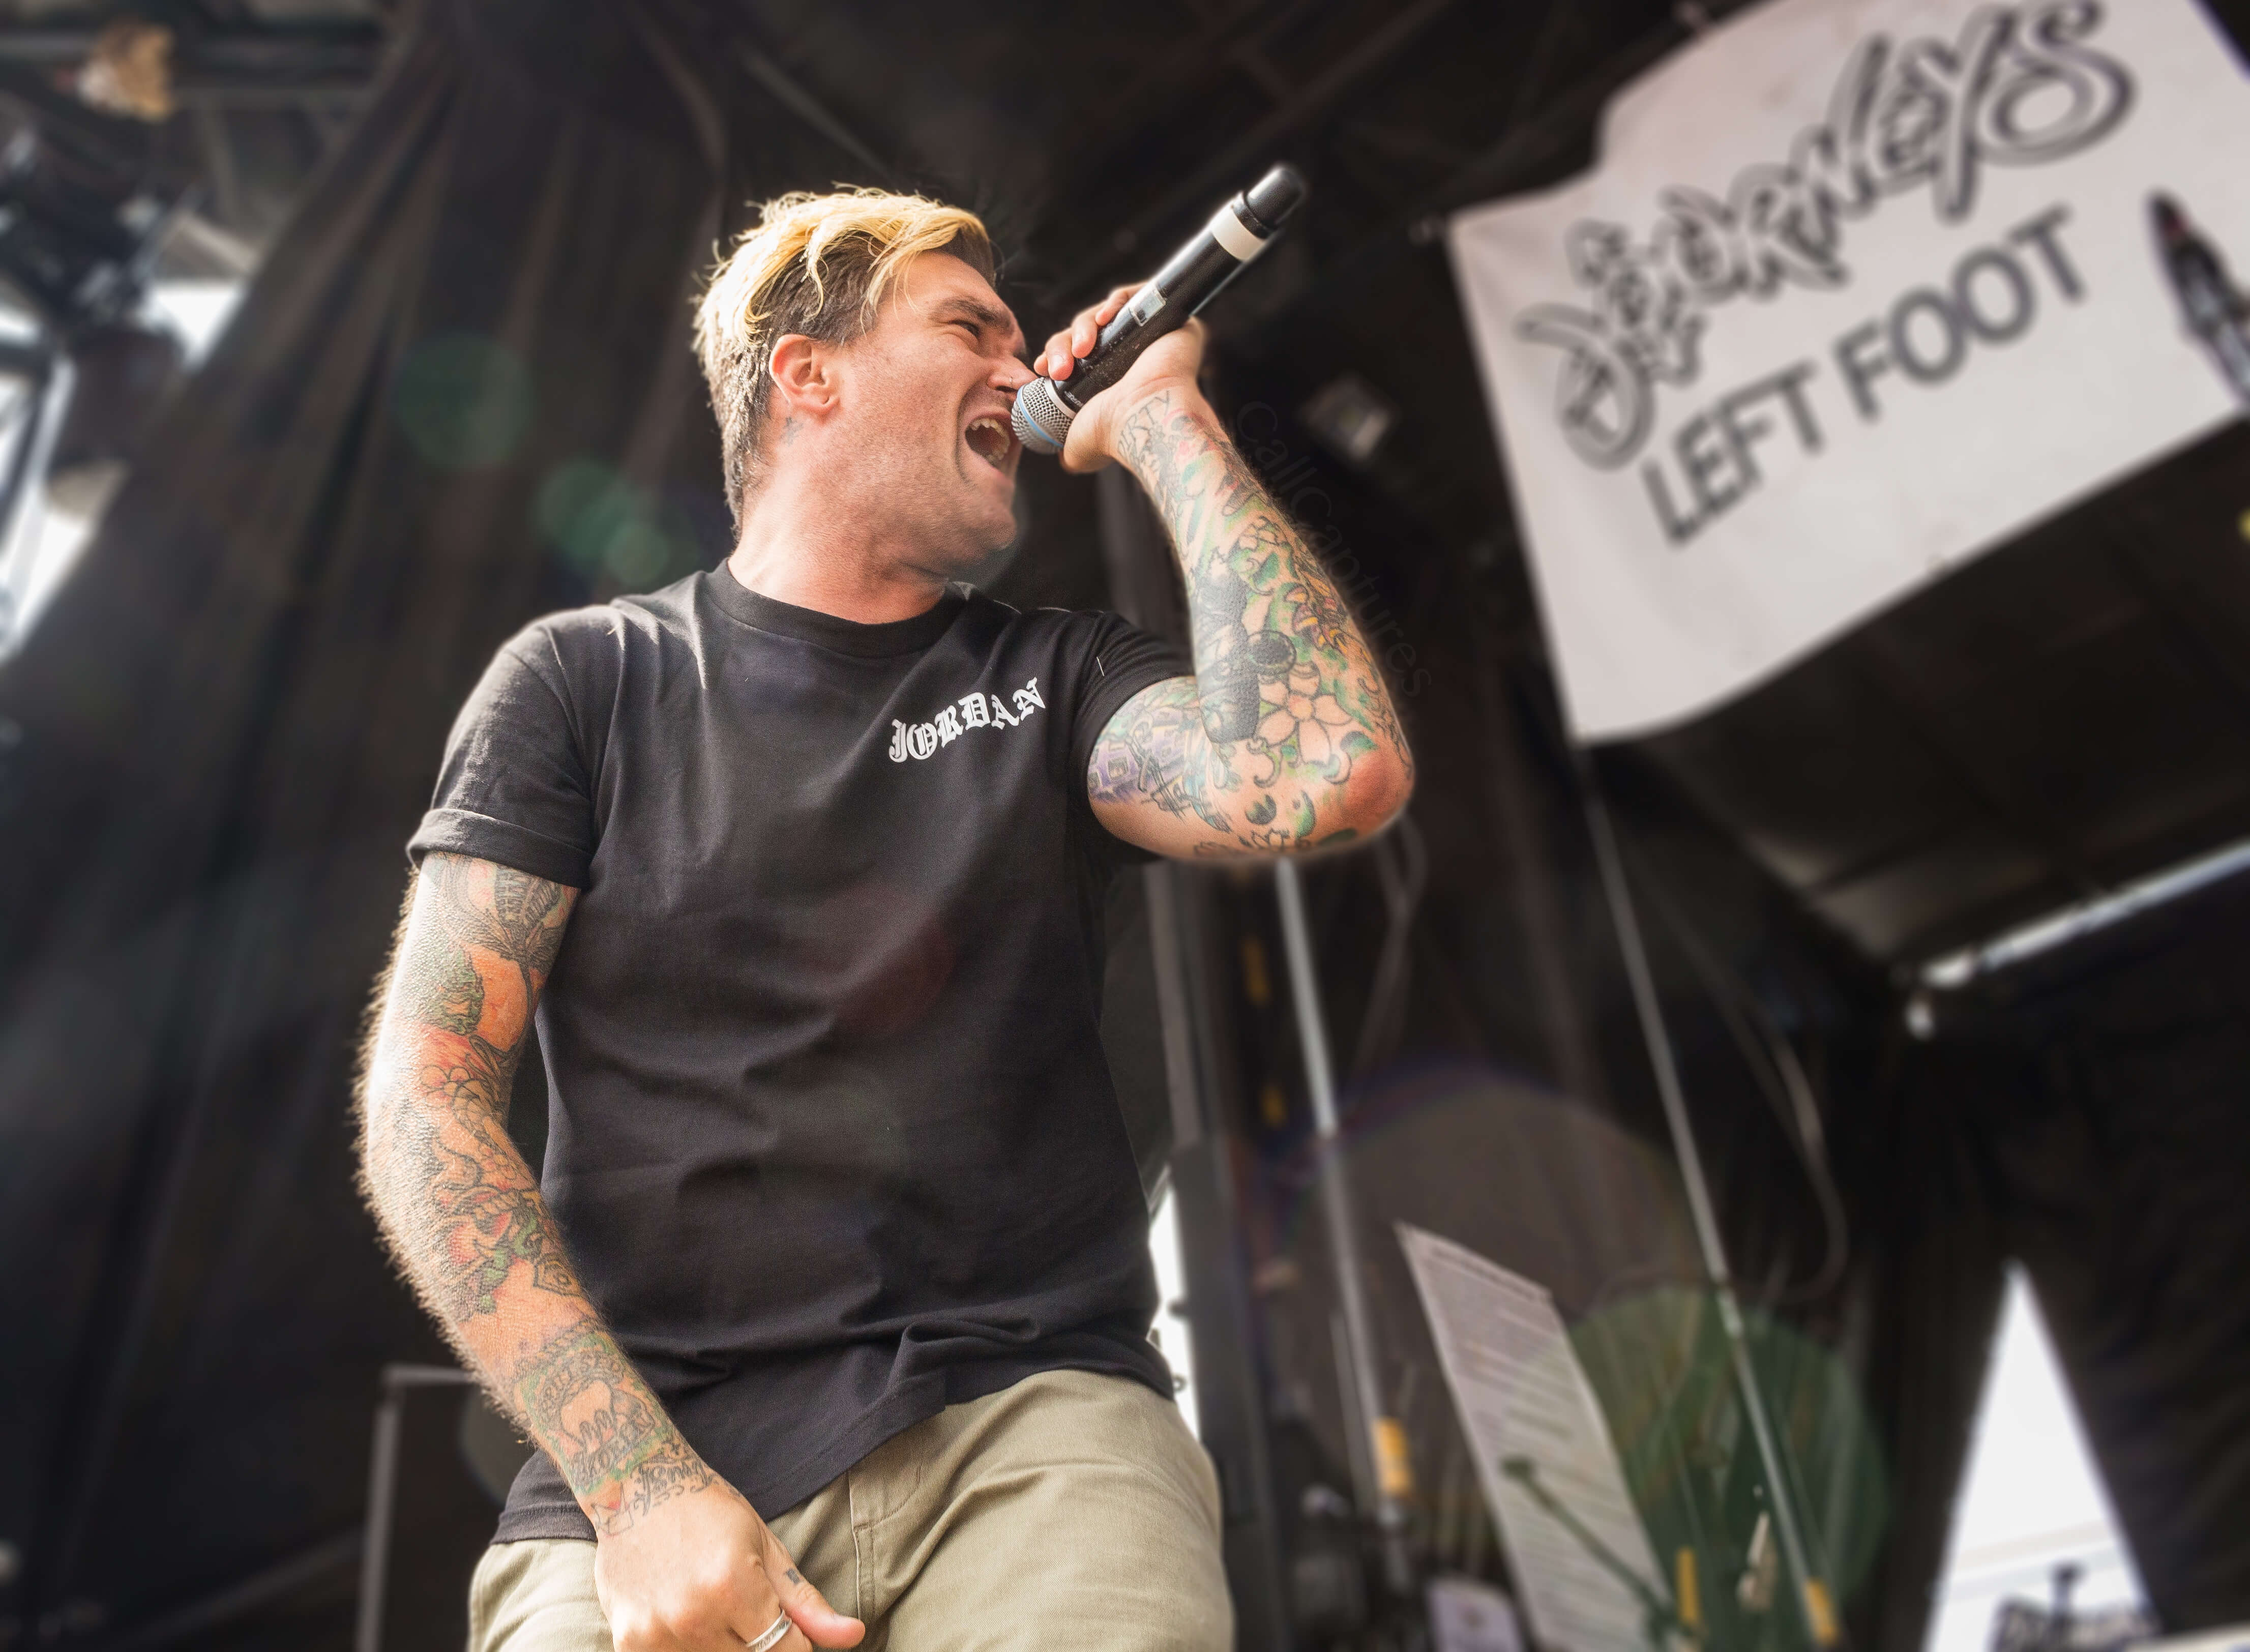 Warped Tour 2016 proves the punk music festival still has fans both young and old